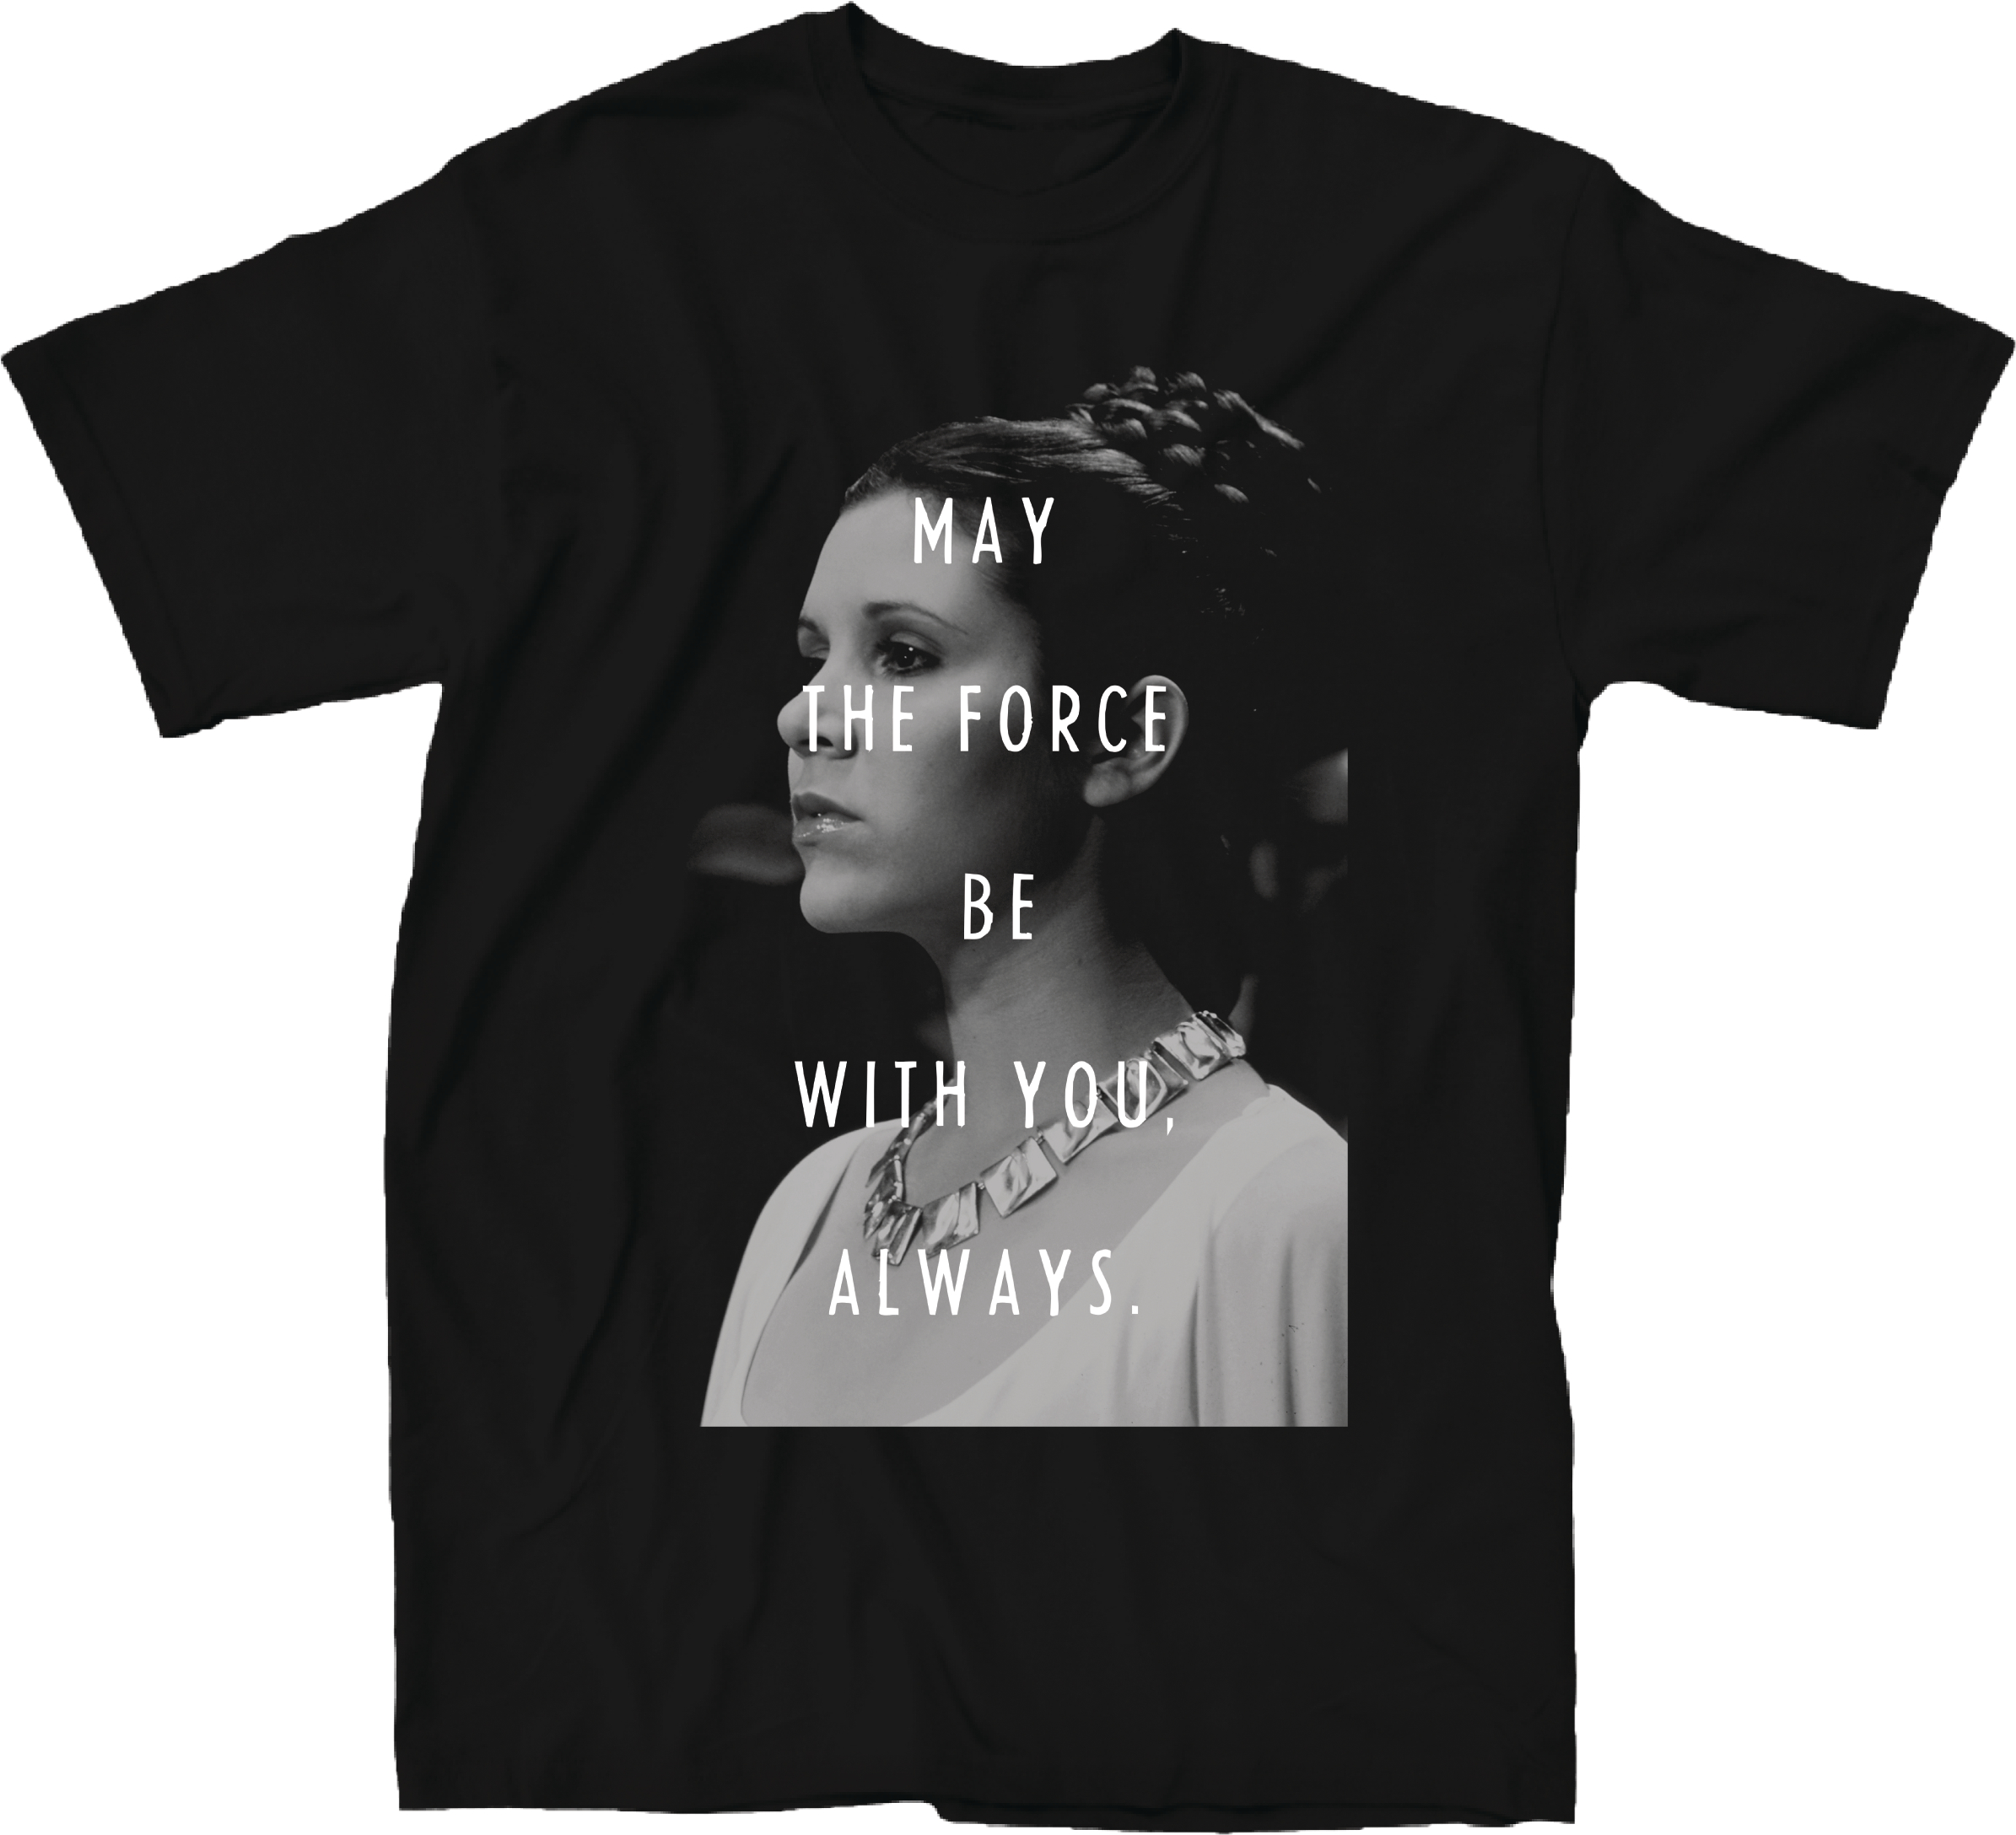 STAR WARS LEIA AND THE FORCE BLACK T/S LG